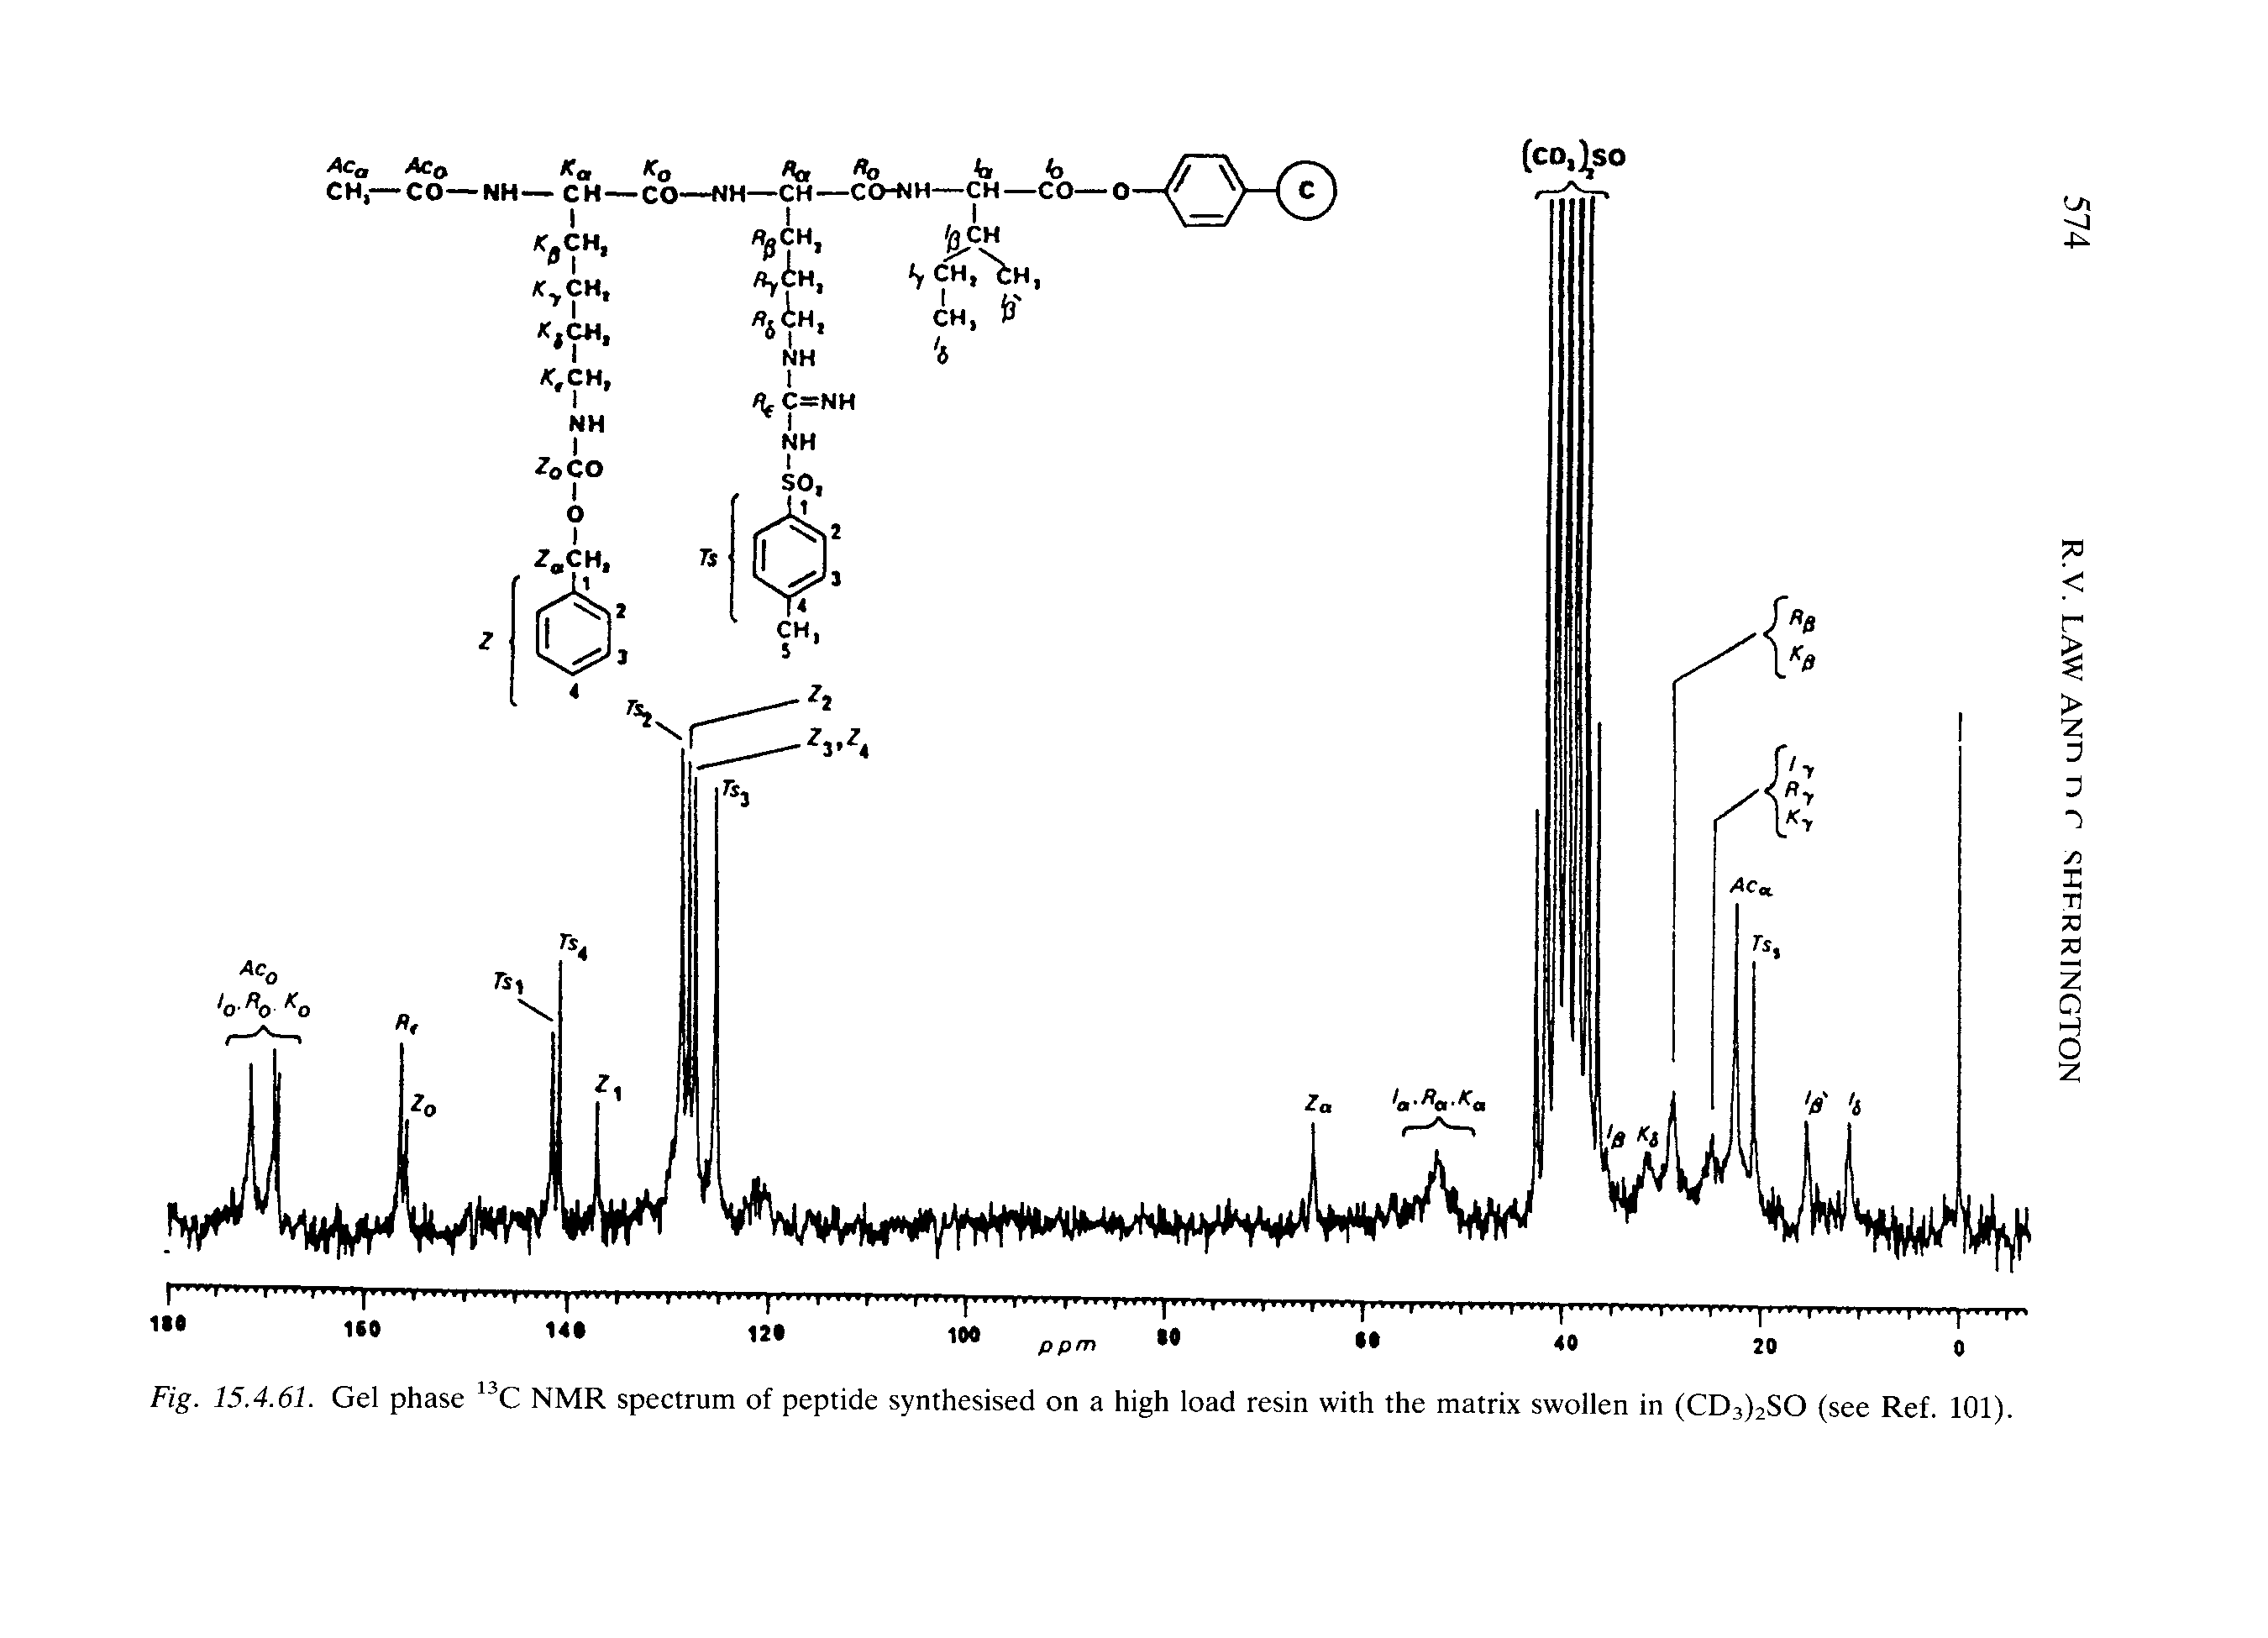 Fig. 15.4.61. Gel phase NMR spectrum of peptide synthesised on a high load resin with the matrix swollen in ( 03)280 (see Ref. 101).